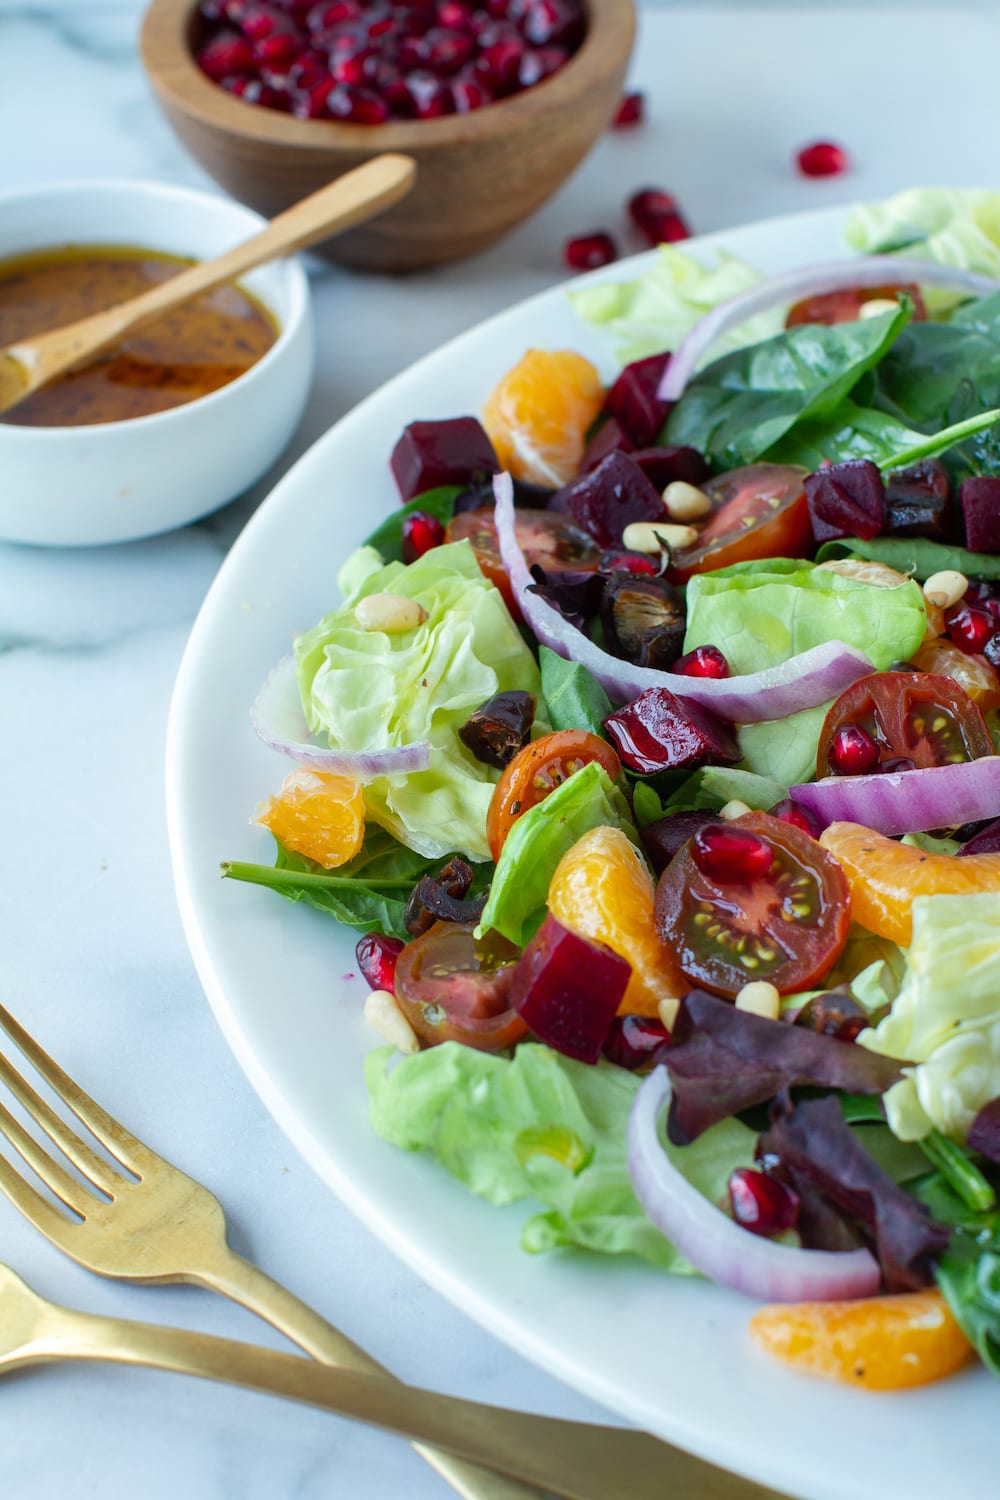 A bed of spinach and lettuce topped with pomegranates, pine nuts, clementine segments, julienned red onions and chopped beets. Salad dressing sits off to the side.